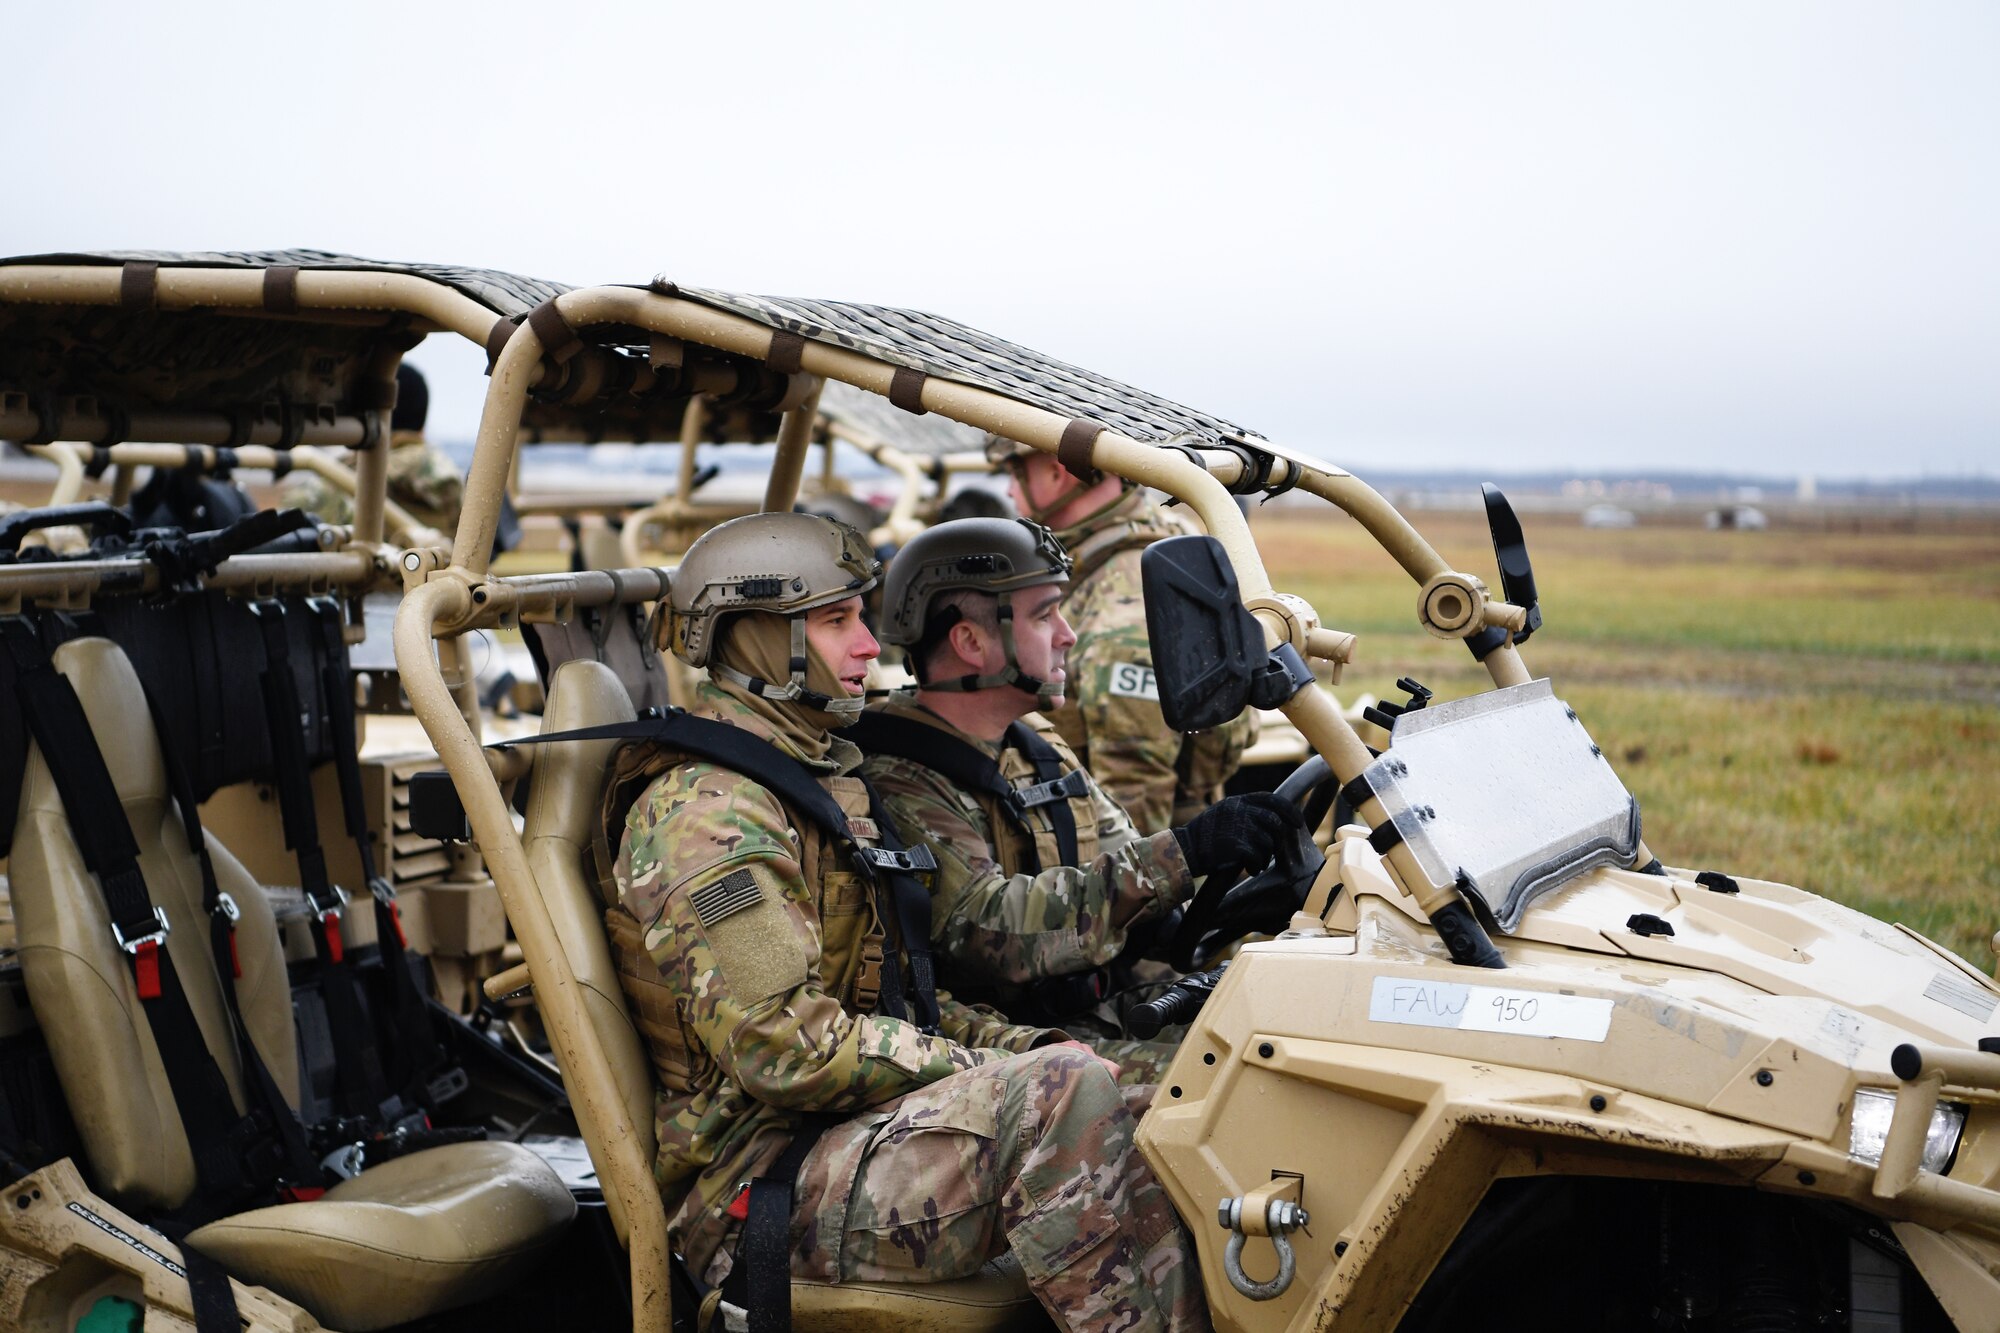 Chief Master Sgt. Kristopher Berg, U.S. Air Force Expeditionary Center command chief, operates a Polaris MRZR at the Global Deployment Readiness Center Training Field, Joint Base McGuire-Dix-Lakehurst, New Jersey Dec. 17, 2019. Gordy along with Chief Master Sgt. Kristopher Berg, USAF EC command chief, spent the day learning about the CRW mission. (U.S. Air Force photo by Tech. Sgt. Luther Mitchell)